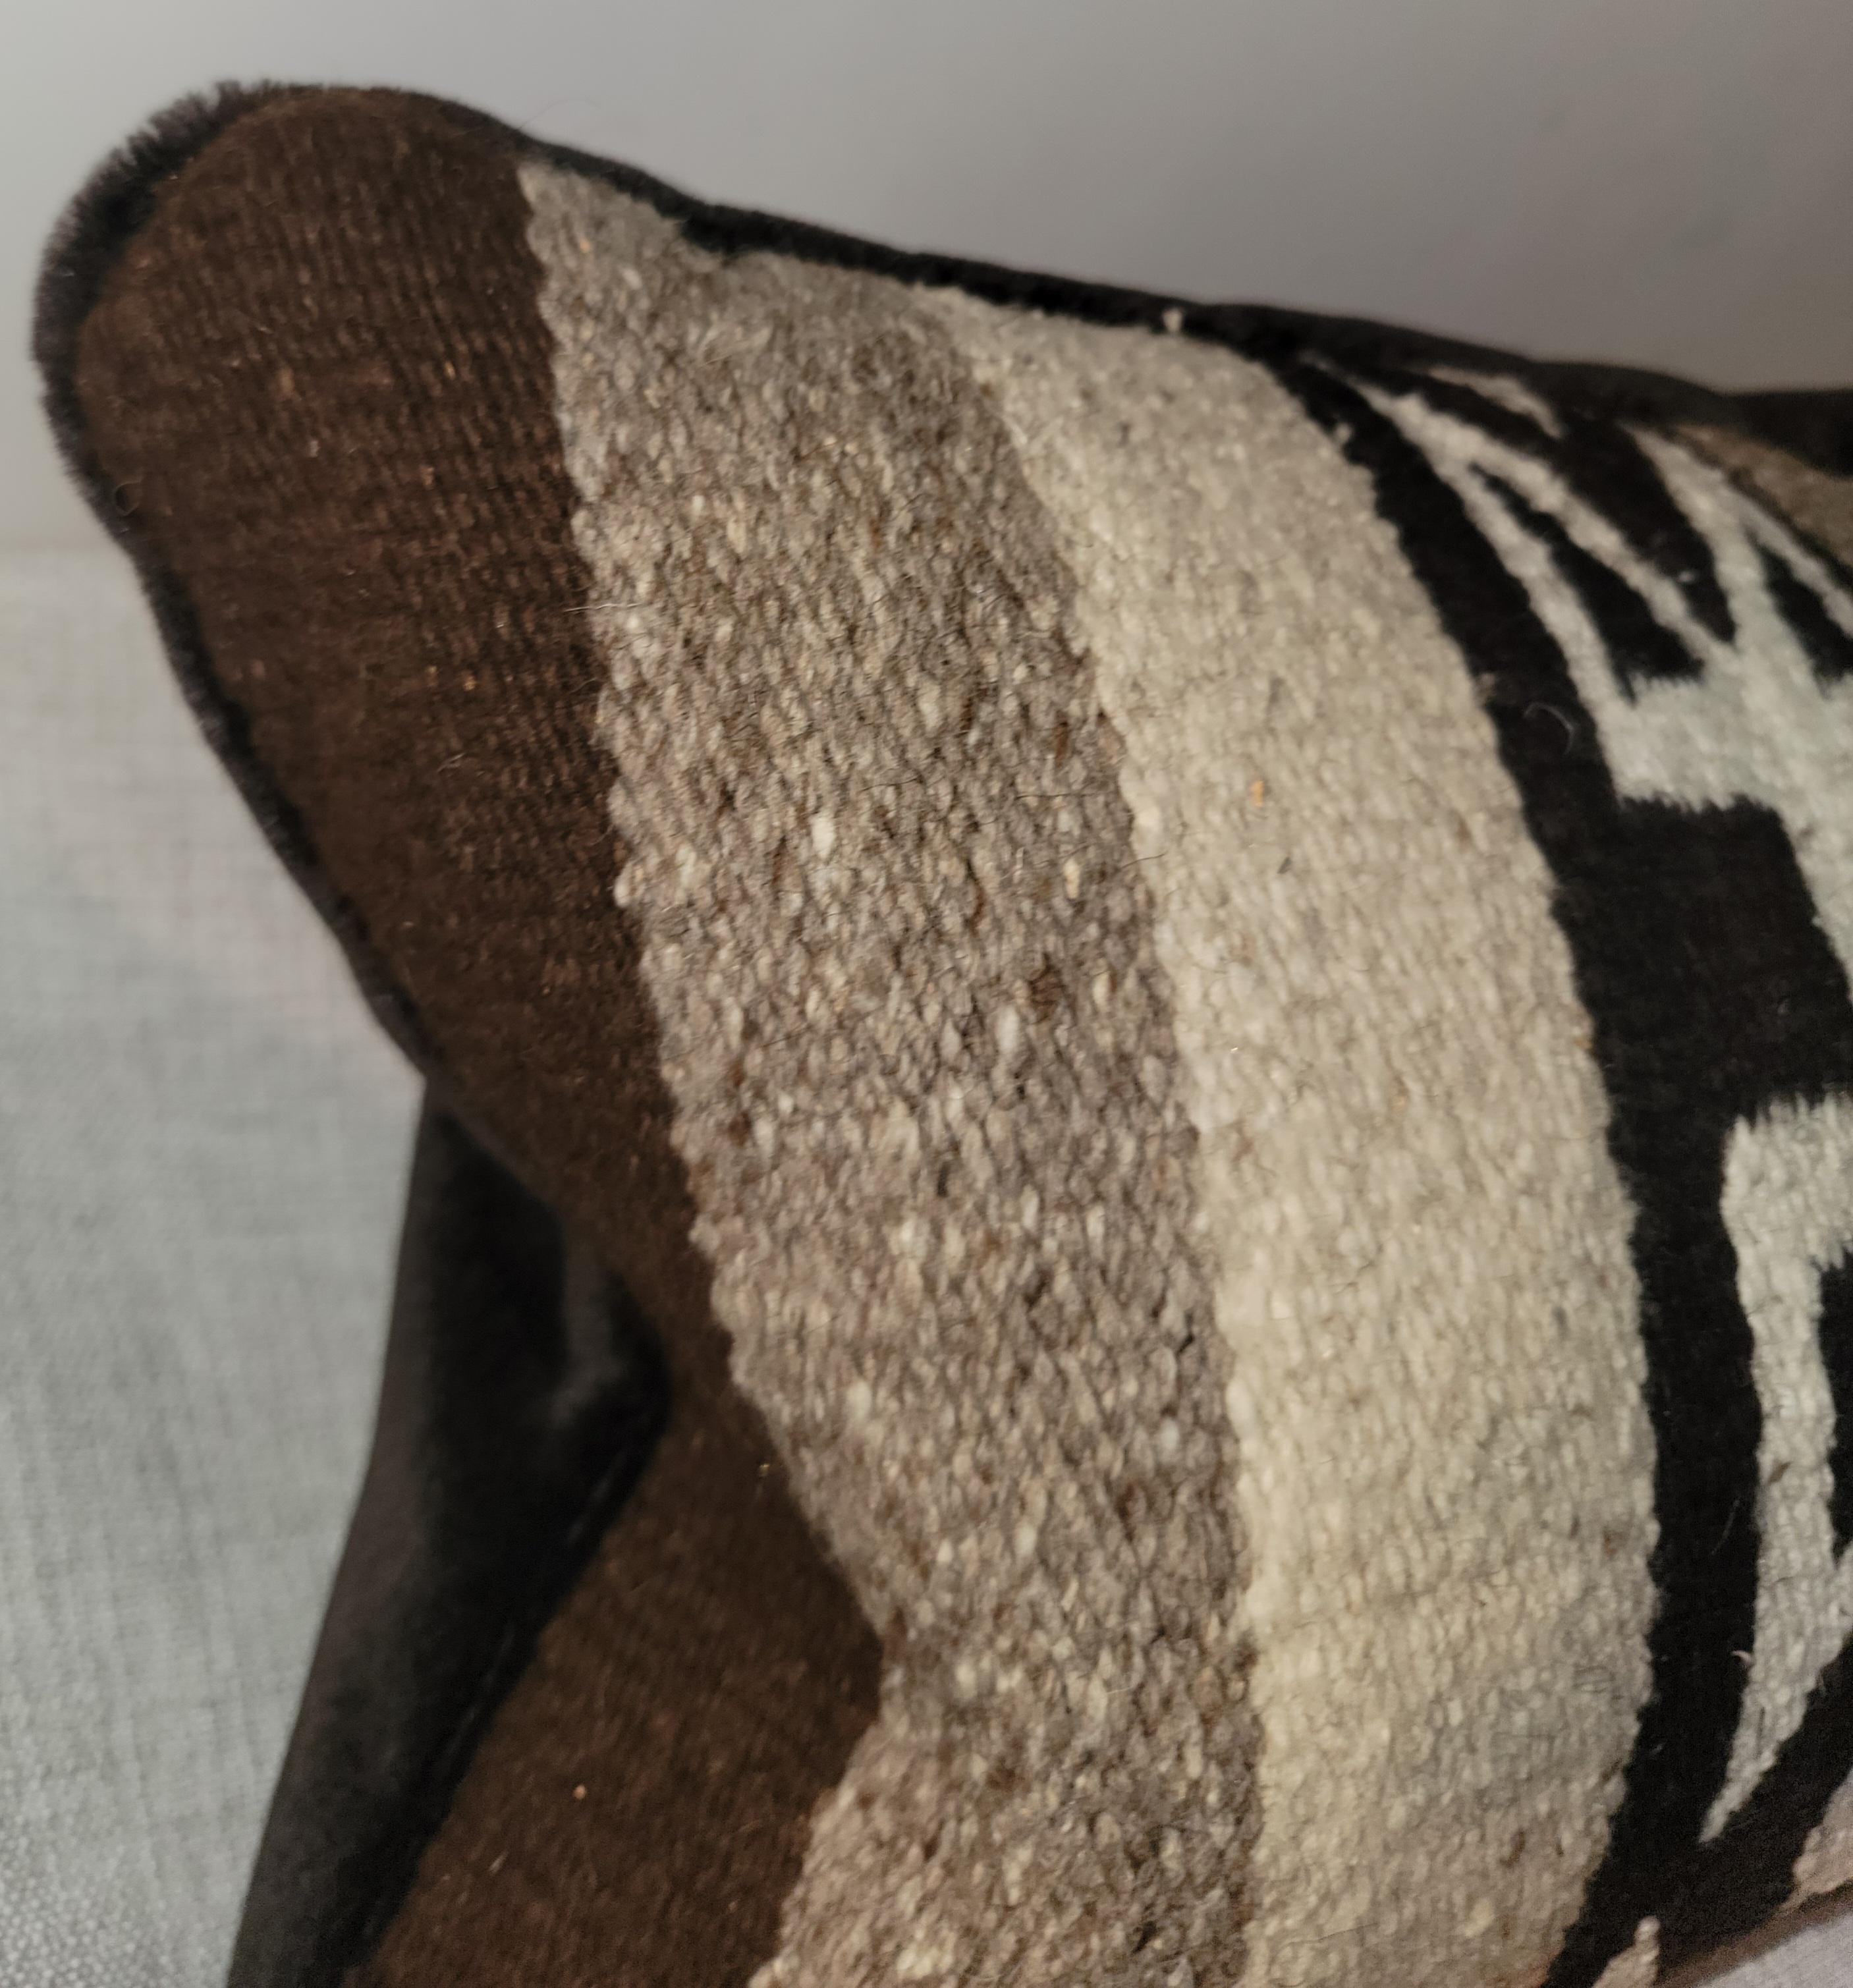 American Pair of Indian Weaving Bolster Pillows For Sale